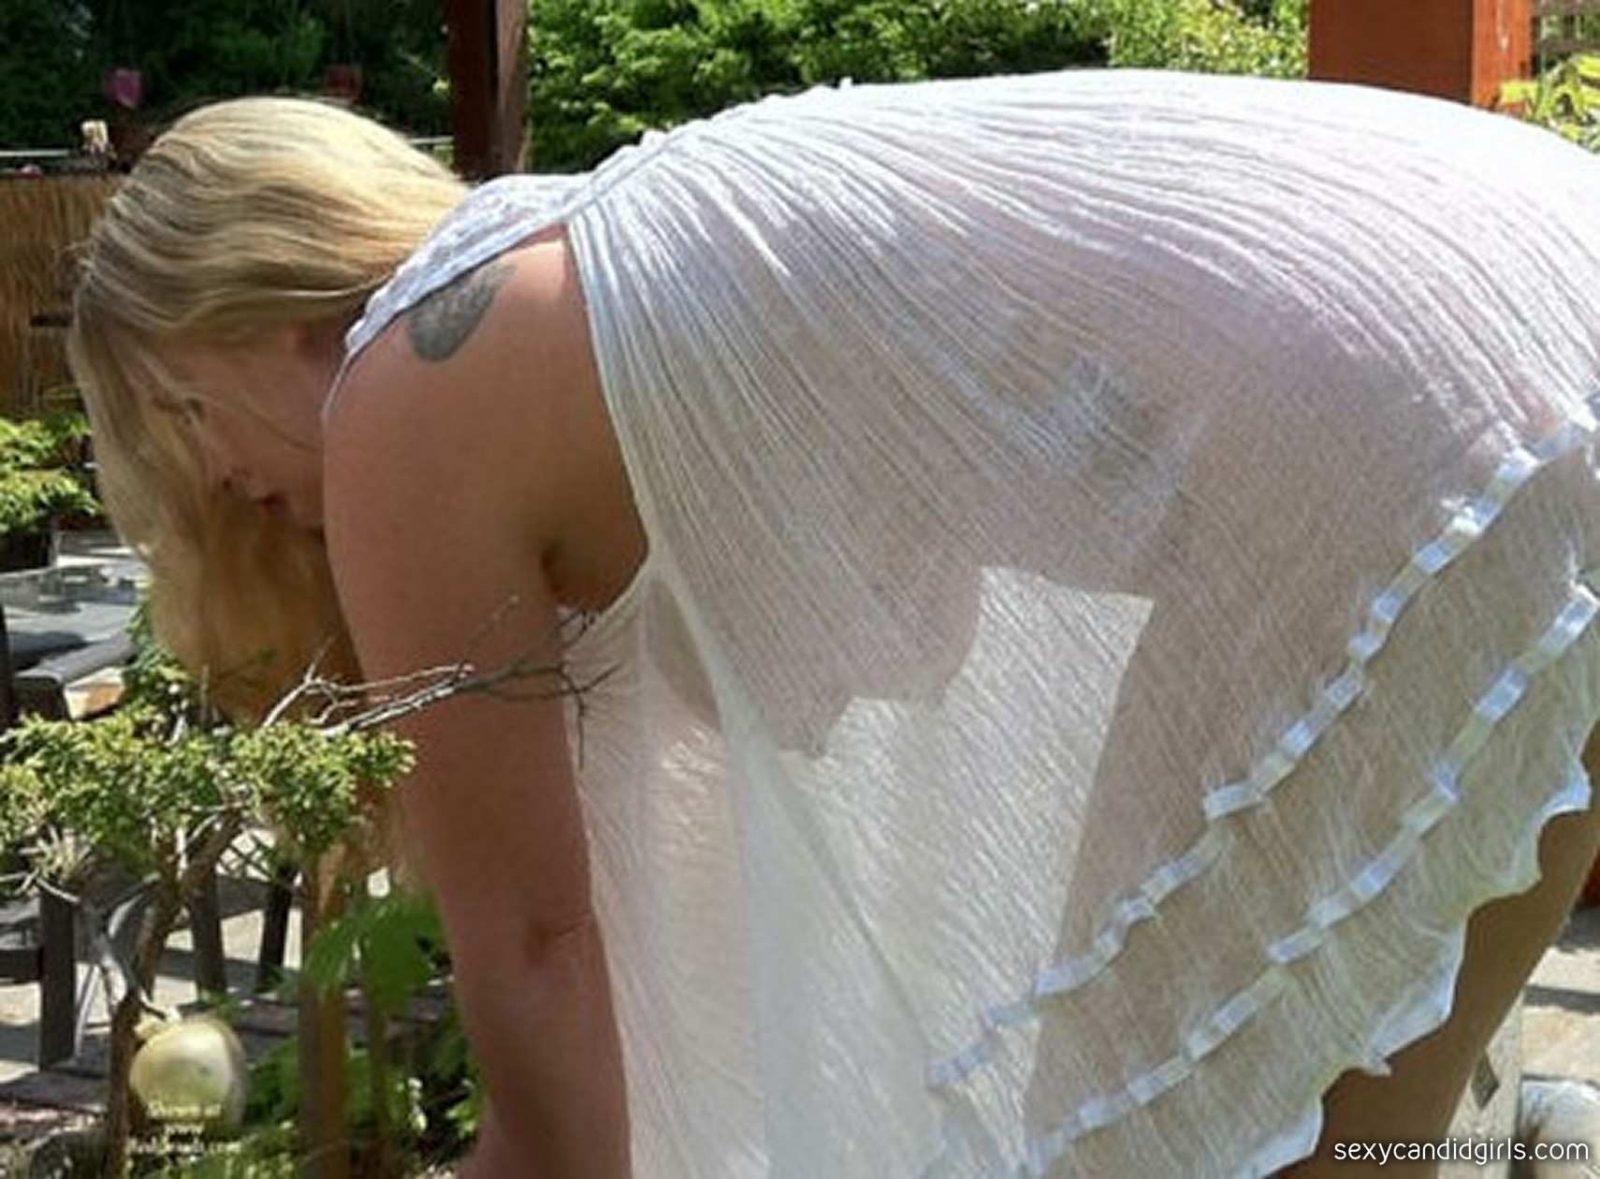 See Thru Dress Blonde With Big Tits Bending Over – Sexy Candid Girls